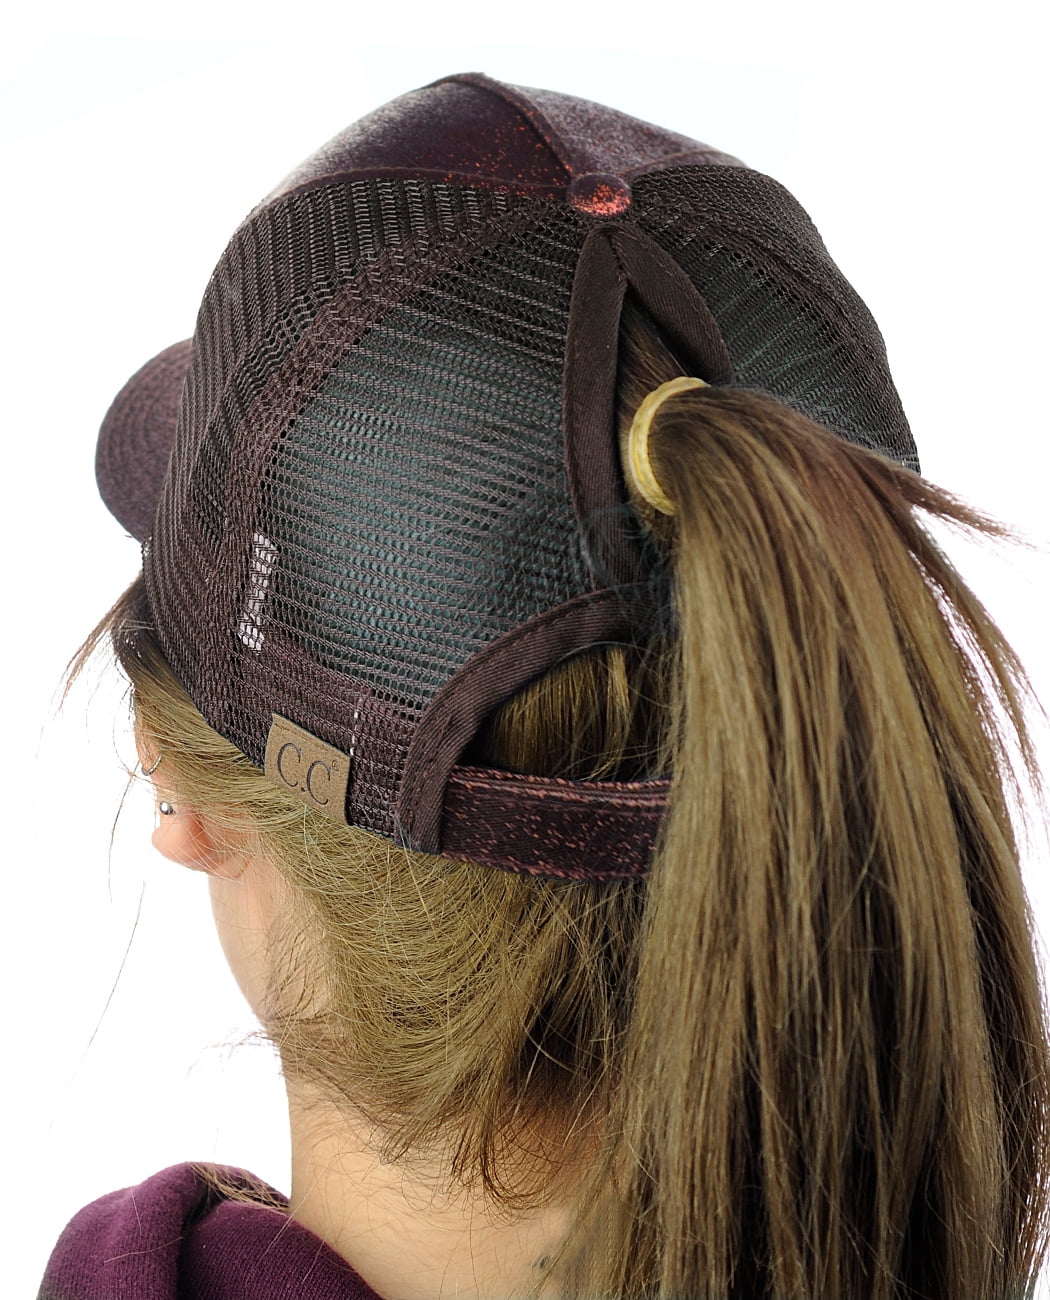 Outdoor running hat Sequined Fluorescent Baseball Cap With A Ponytail Design With A Shiny Mesh Net Cap. Color : Brown 